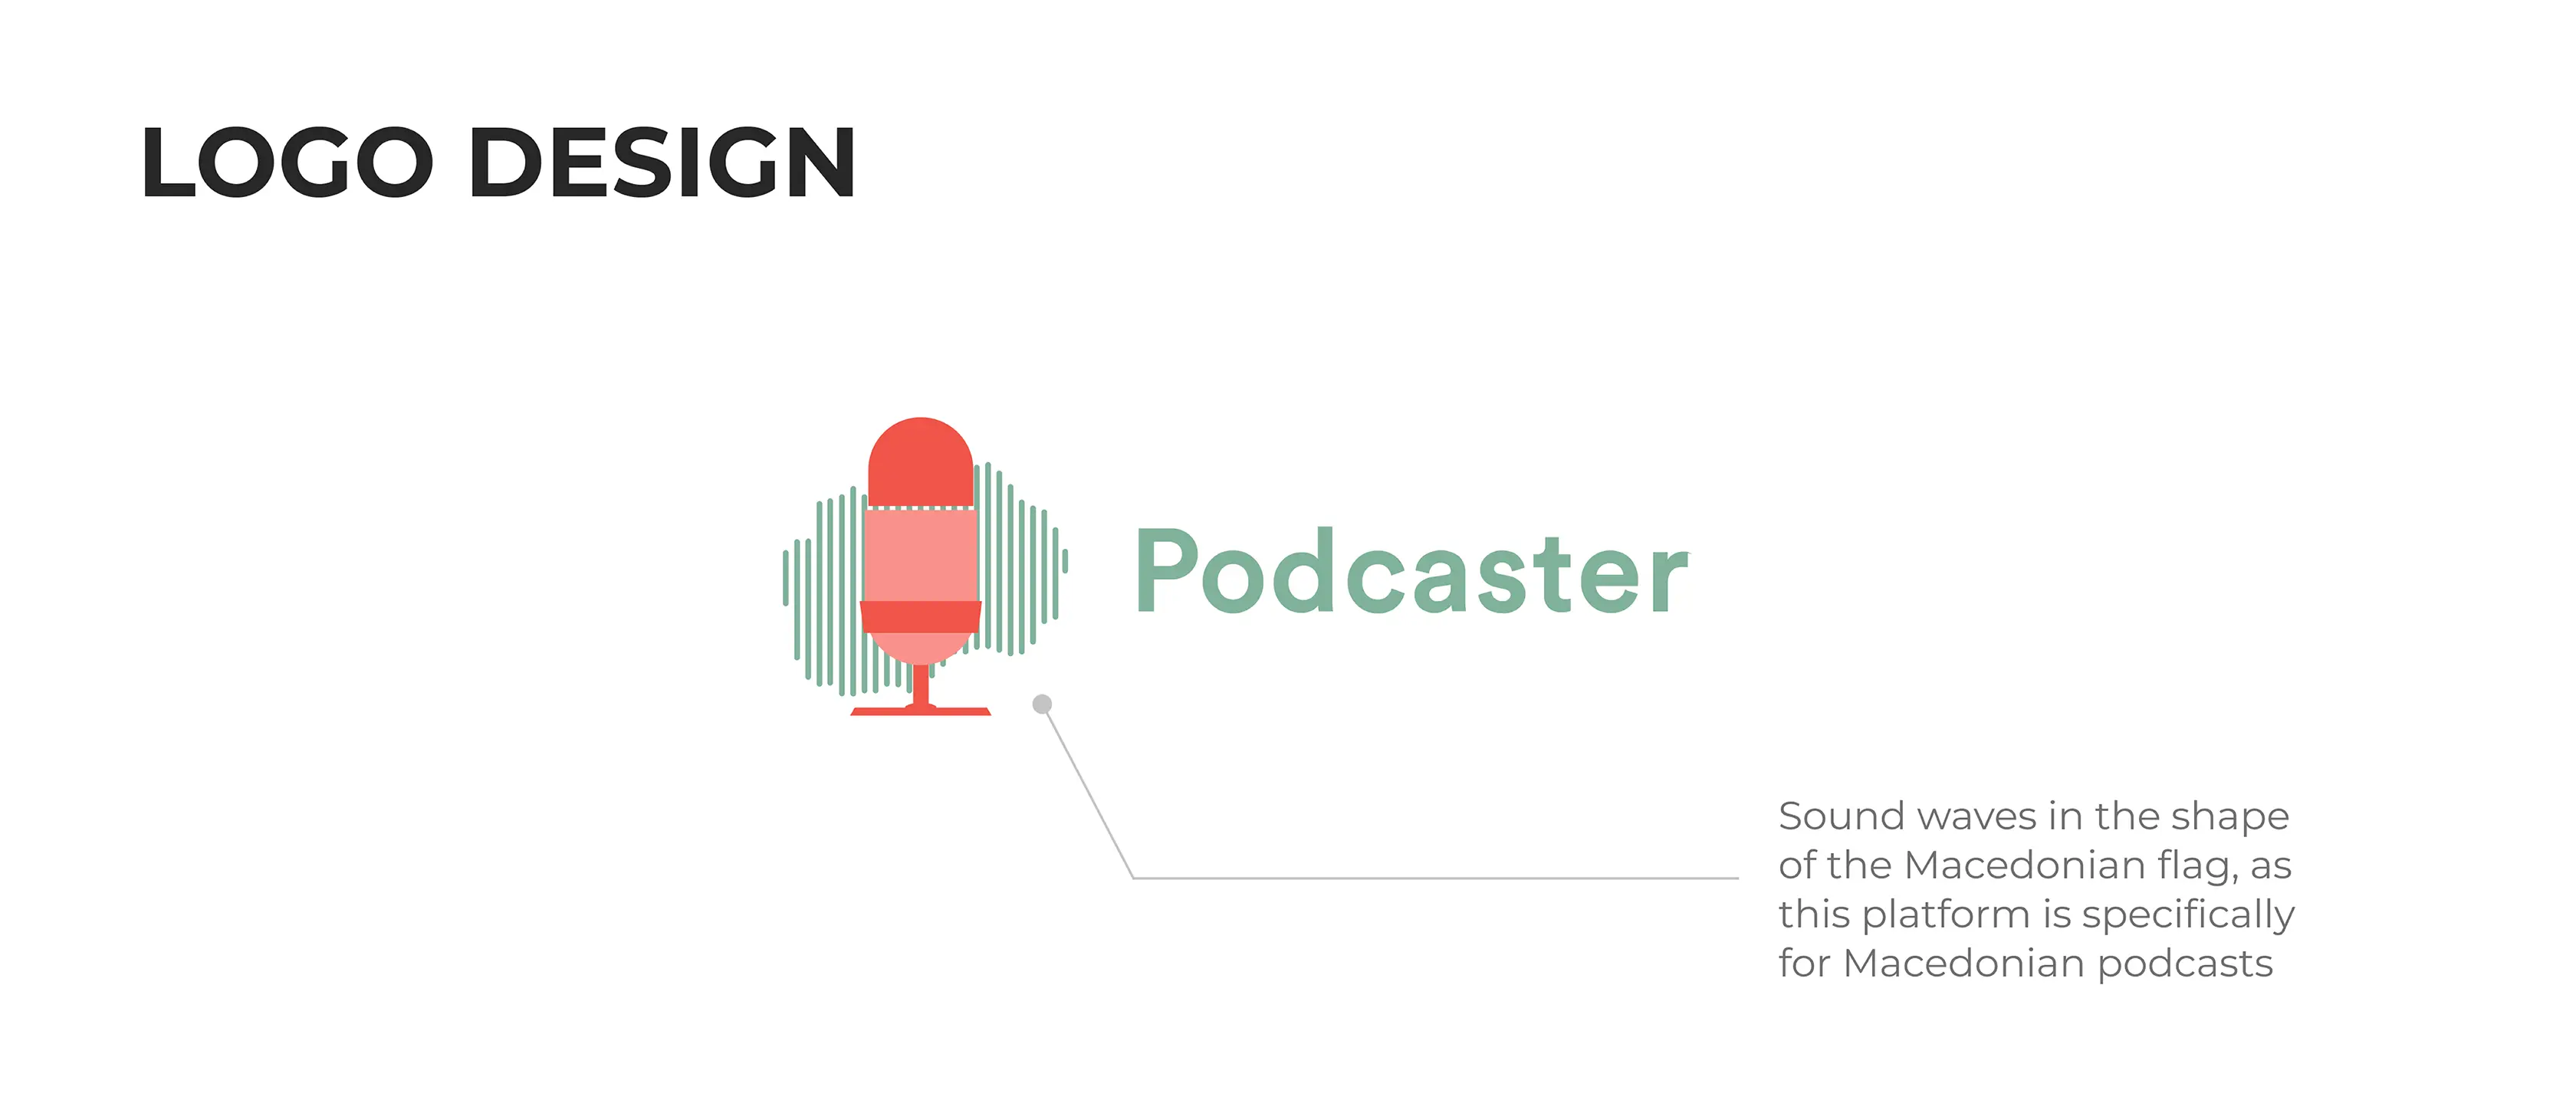 A breakdown of the podcaster logo